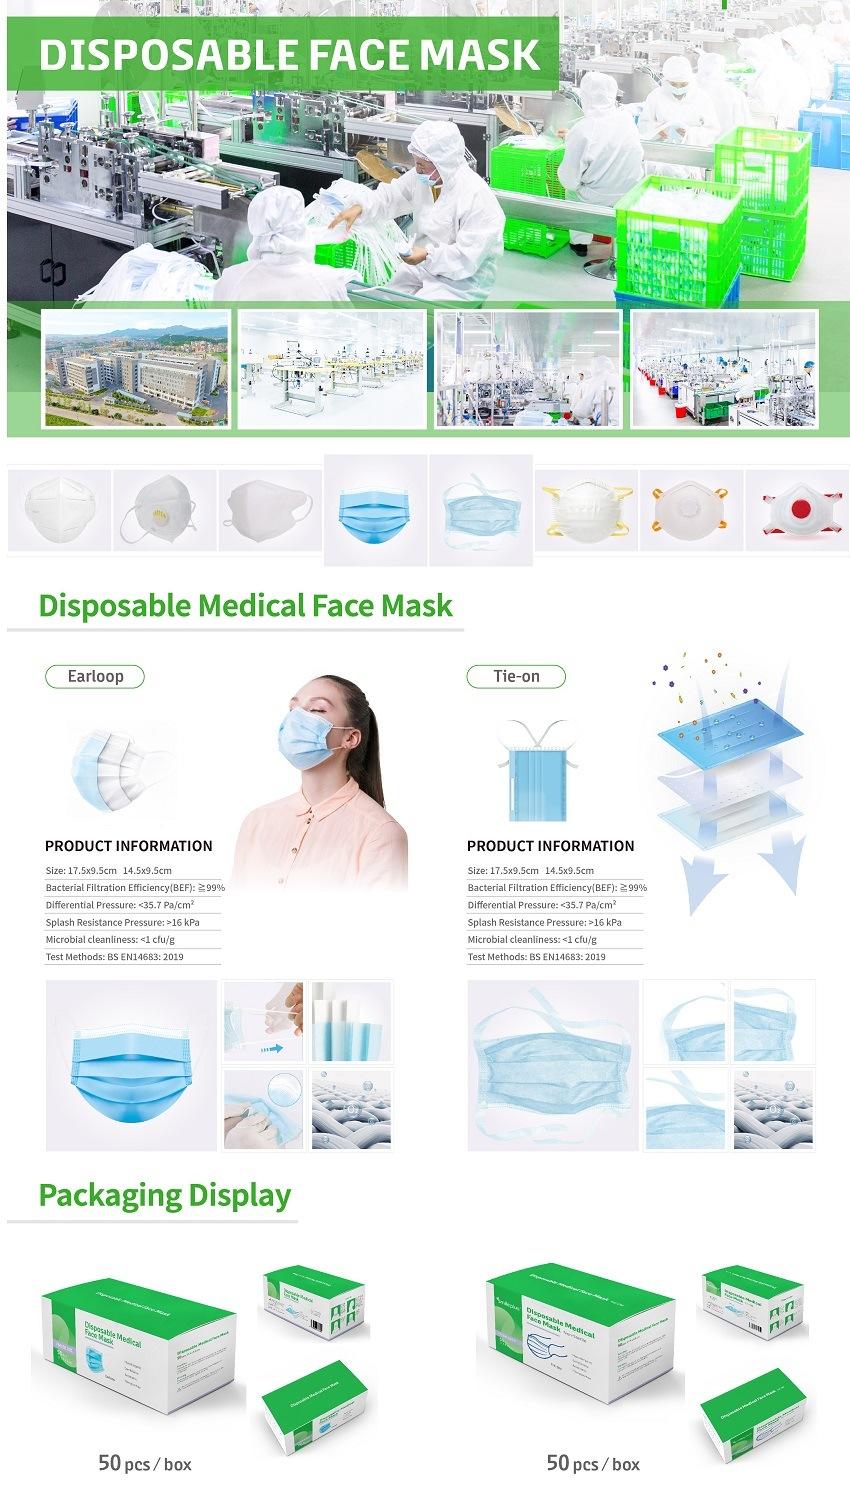 Goldenwell Face Masks Disposable 4 Ply Fabric Packing Color Feature Material Woven